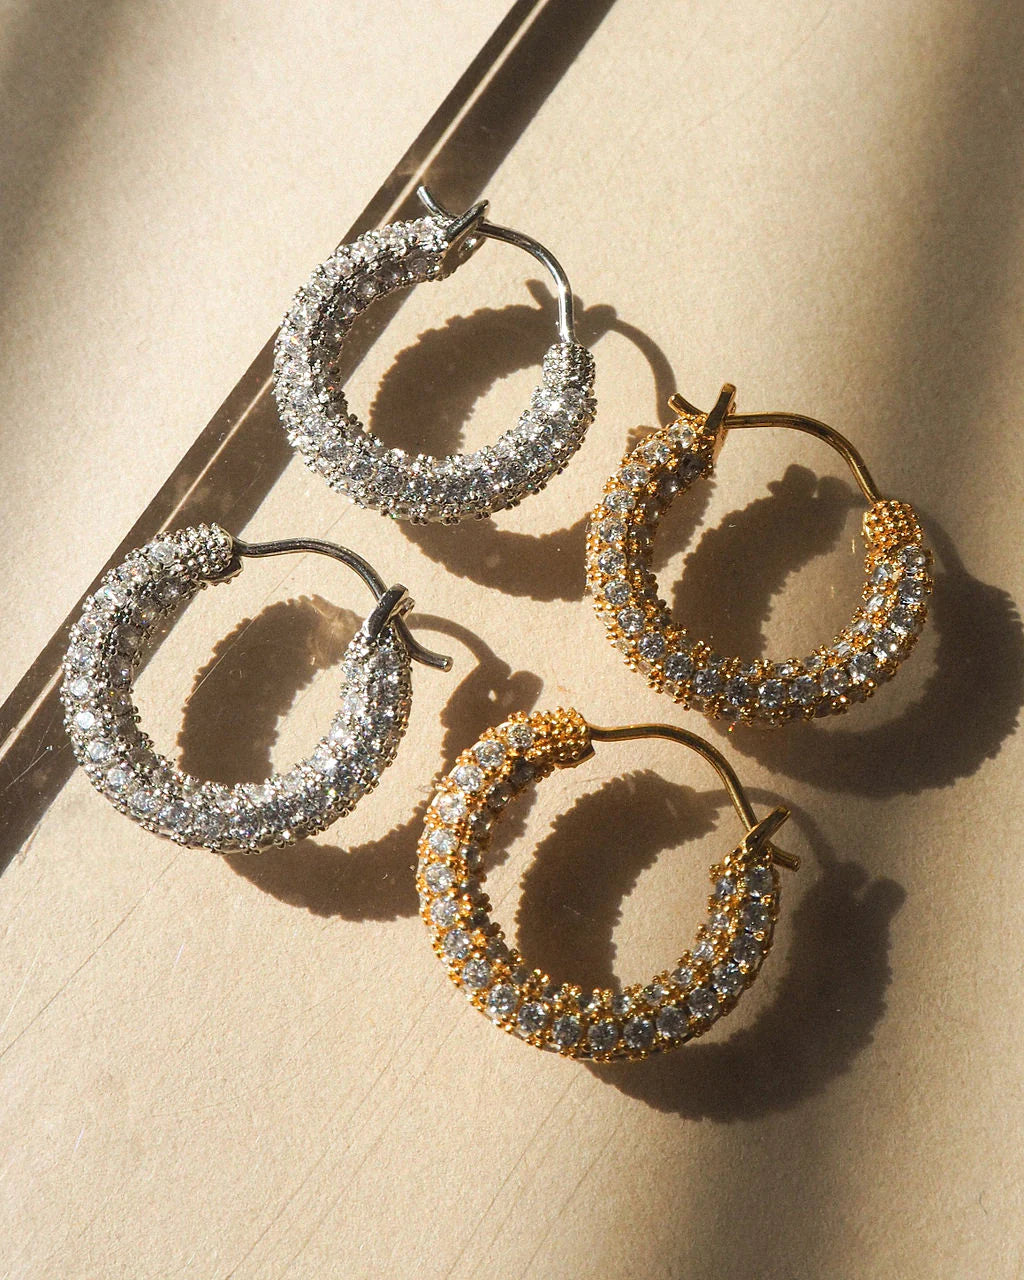 Pavé Baby Amalfi Hoops in Gold - Madison's Niche 